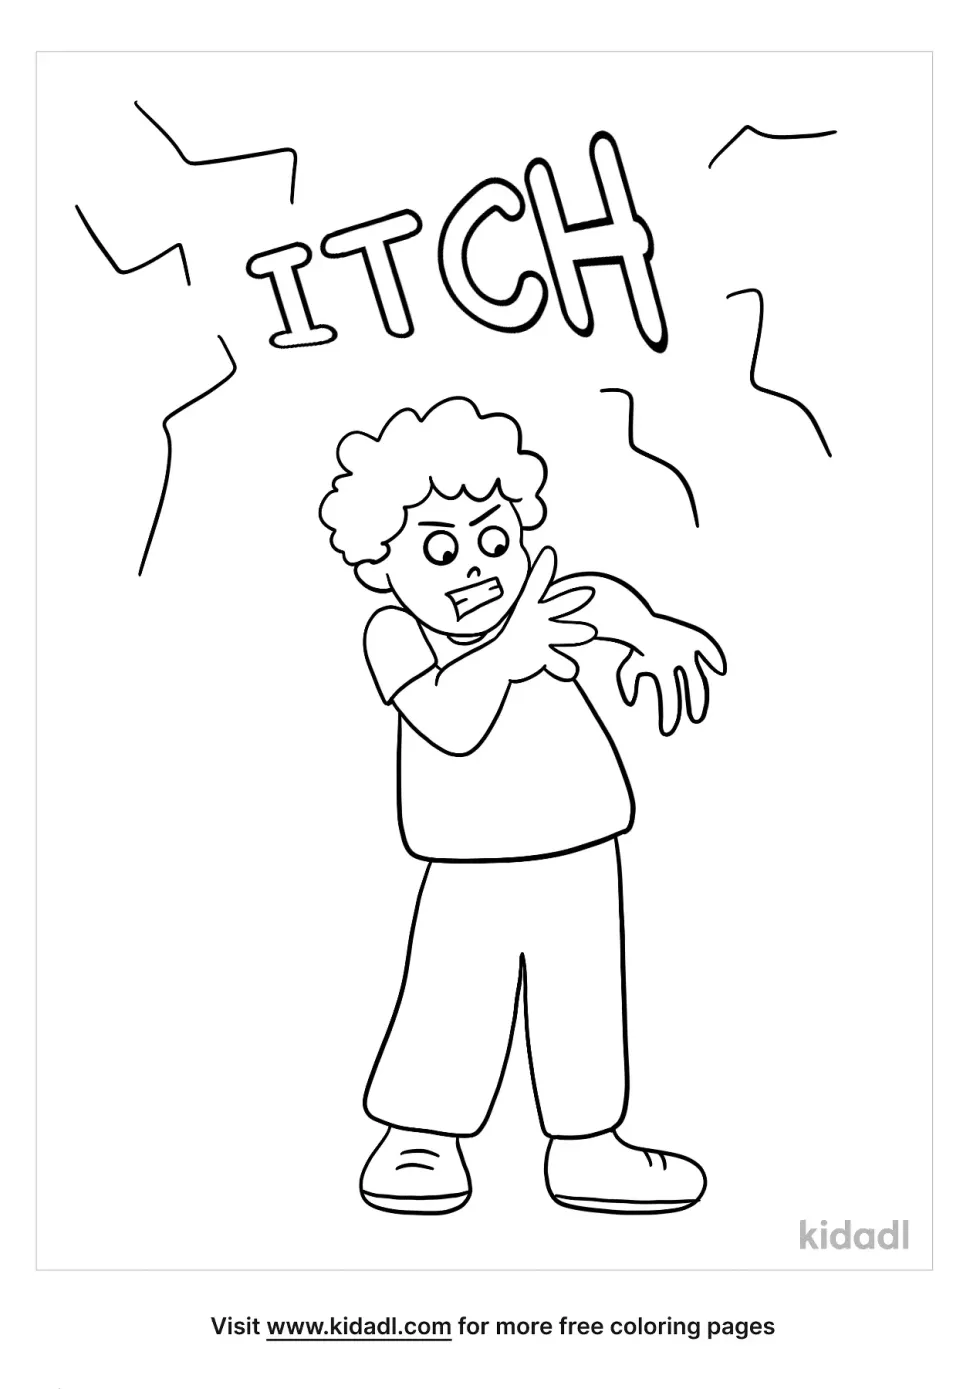 Itch Coloring Page